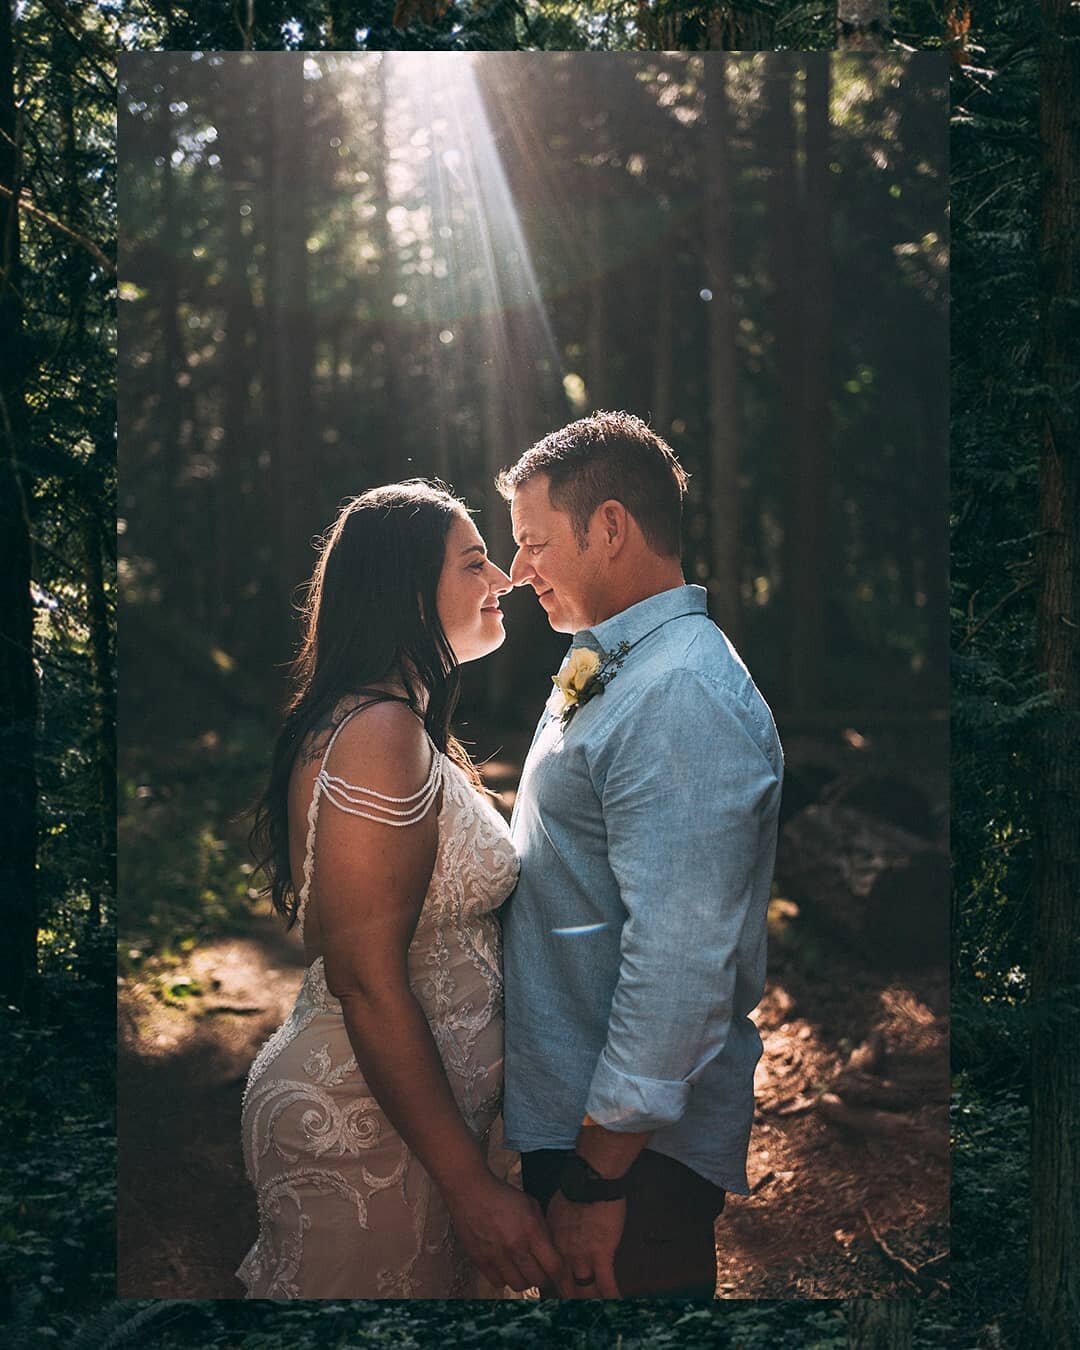 Sierra &amp; Dave only wanted a couple of key elements for their elopement: the ocean, the forest, a small &amp; mighty group of hand selected guests, and to marry to one another. 

Getting married at Galiano Island at a family friend's private prope